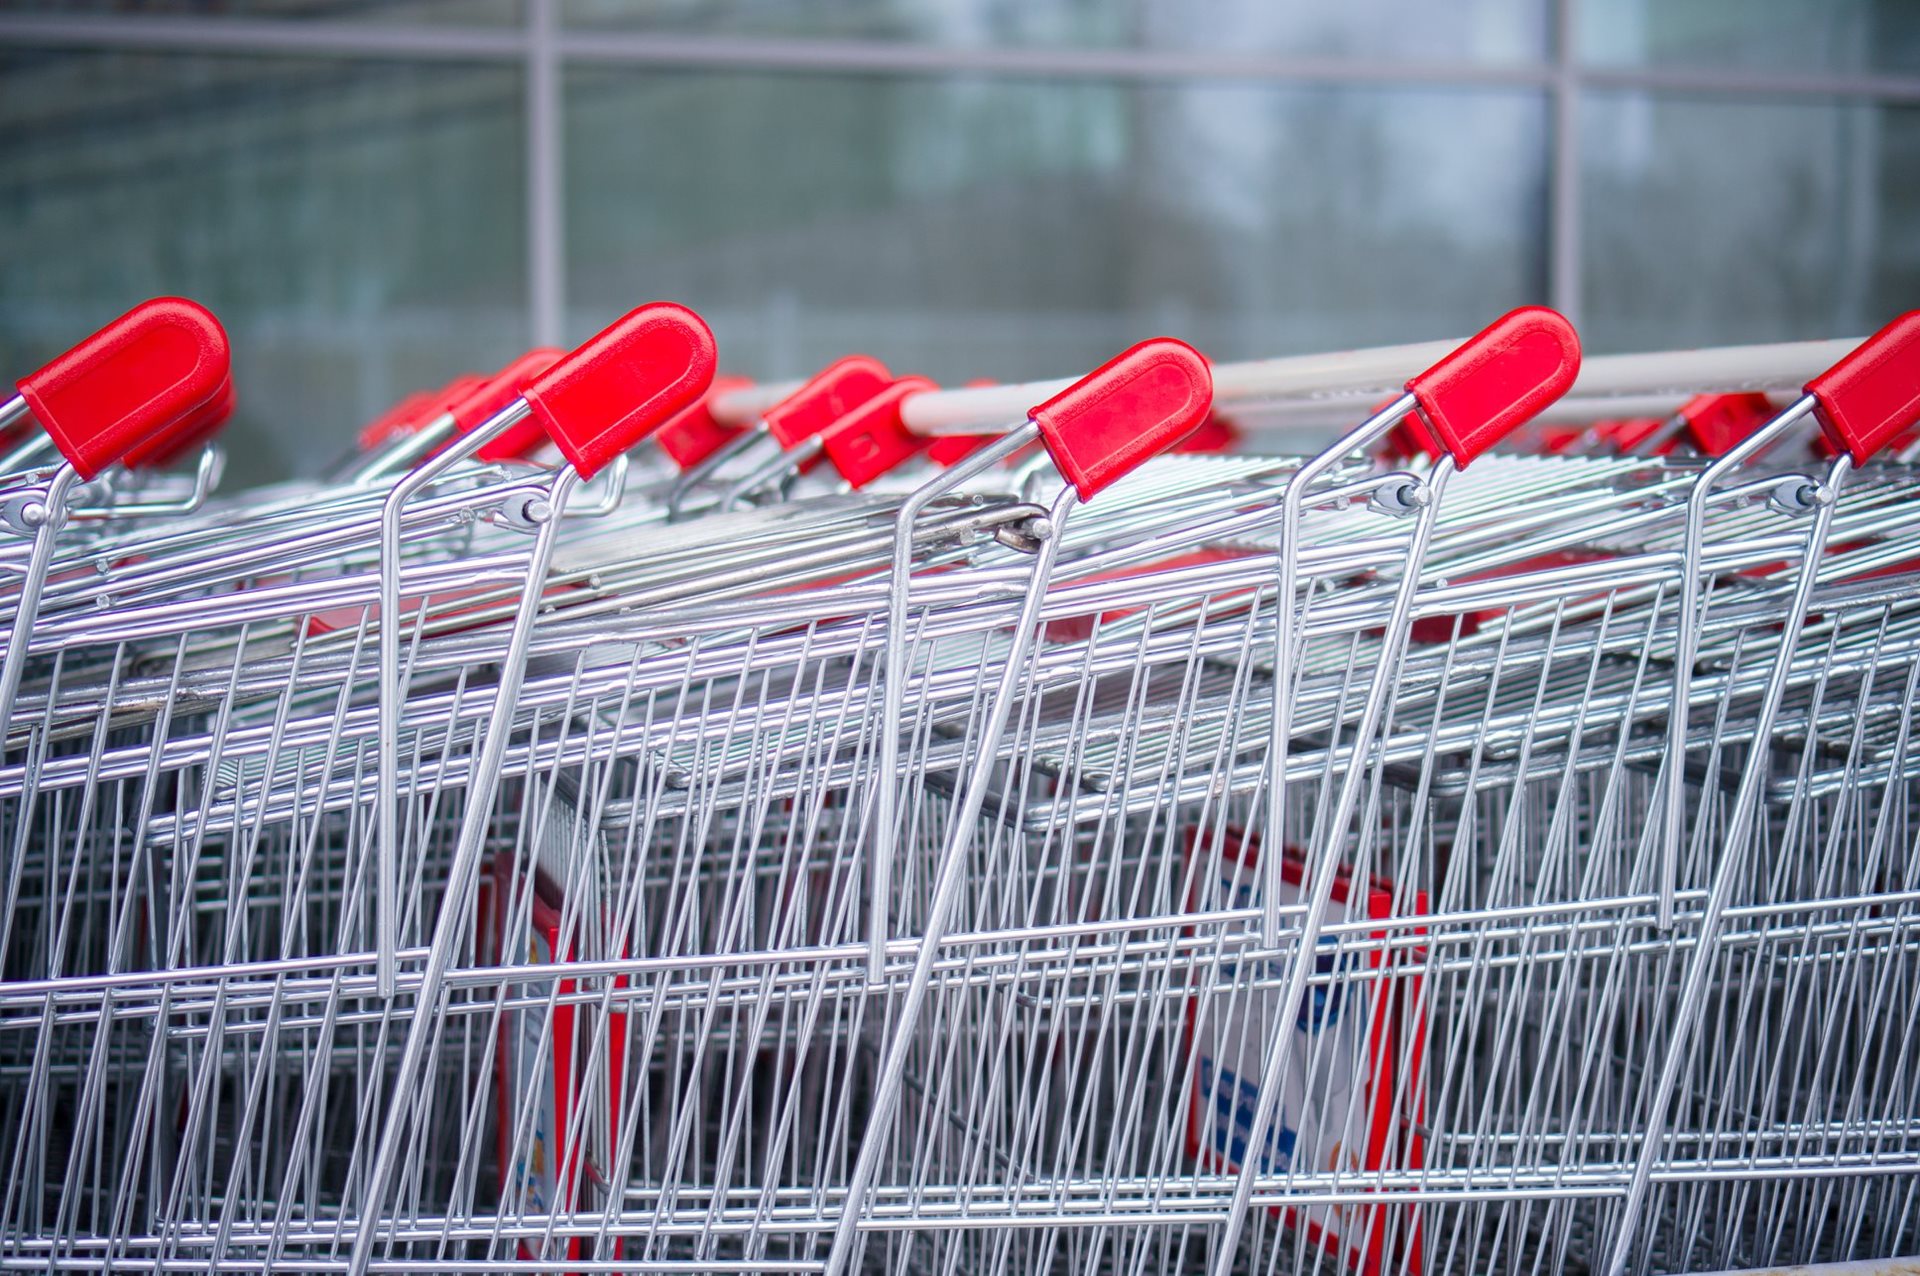 Shopping trolleys stacked together.